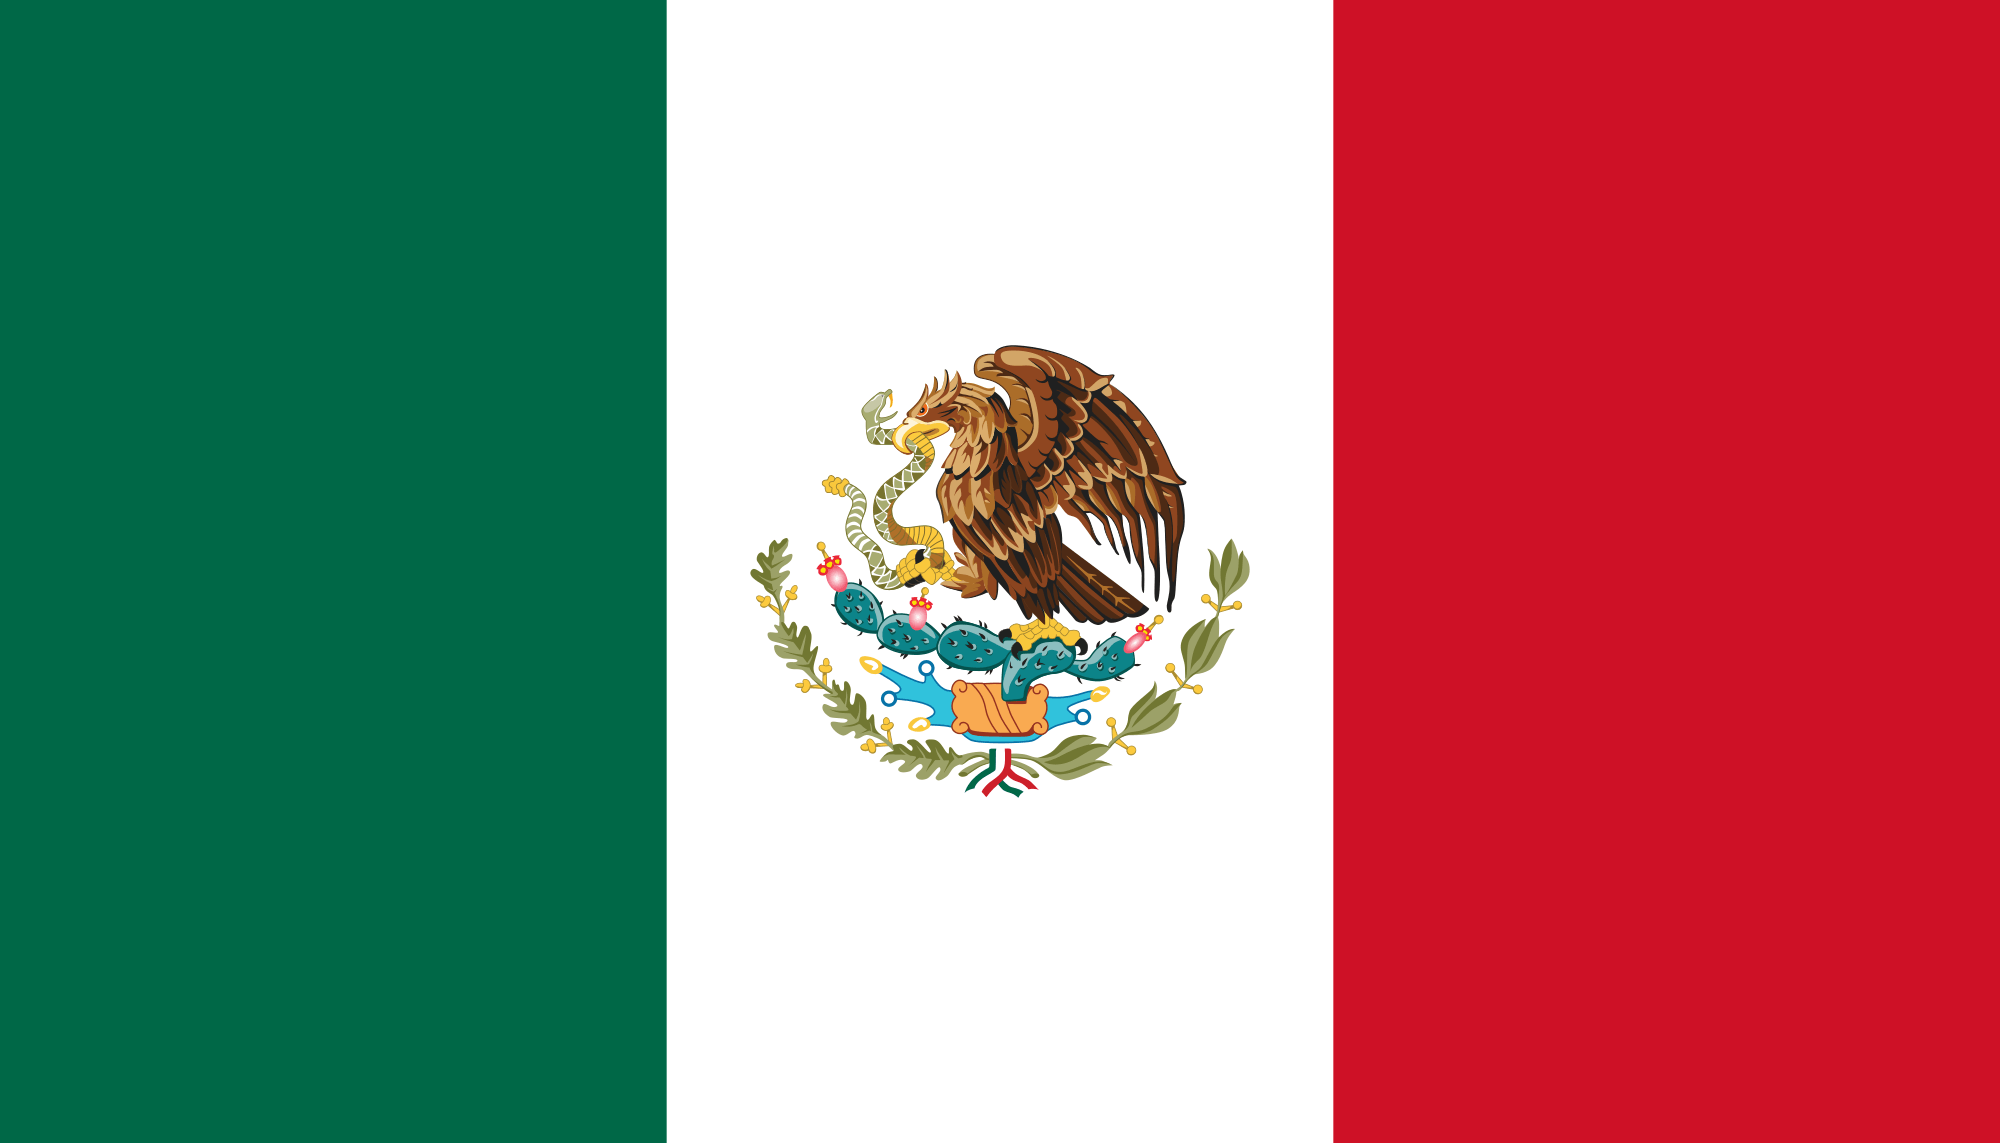 Red White and Green Logo - Flag of Mexico